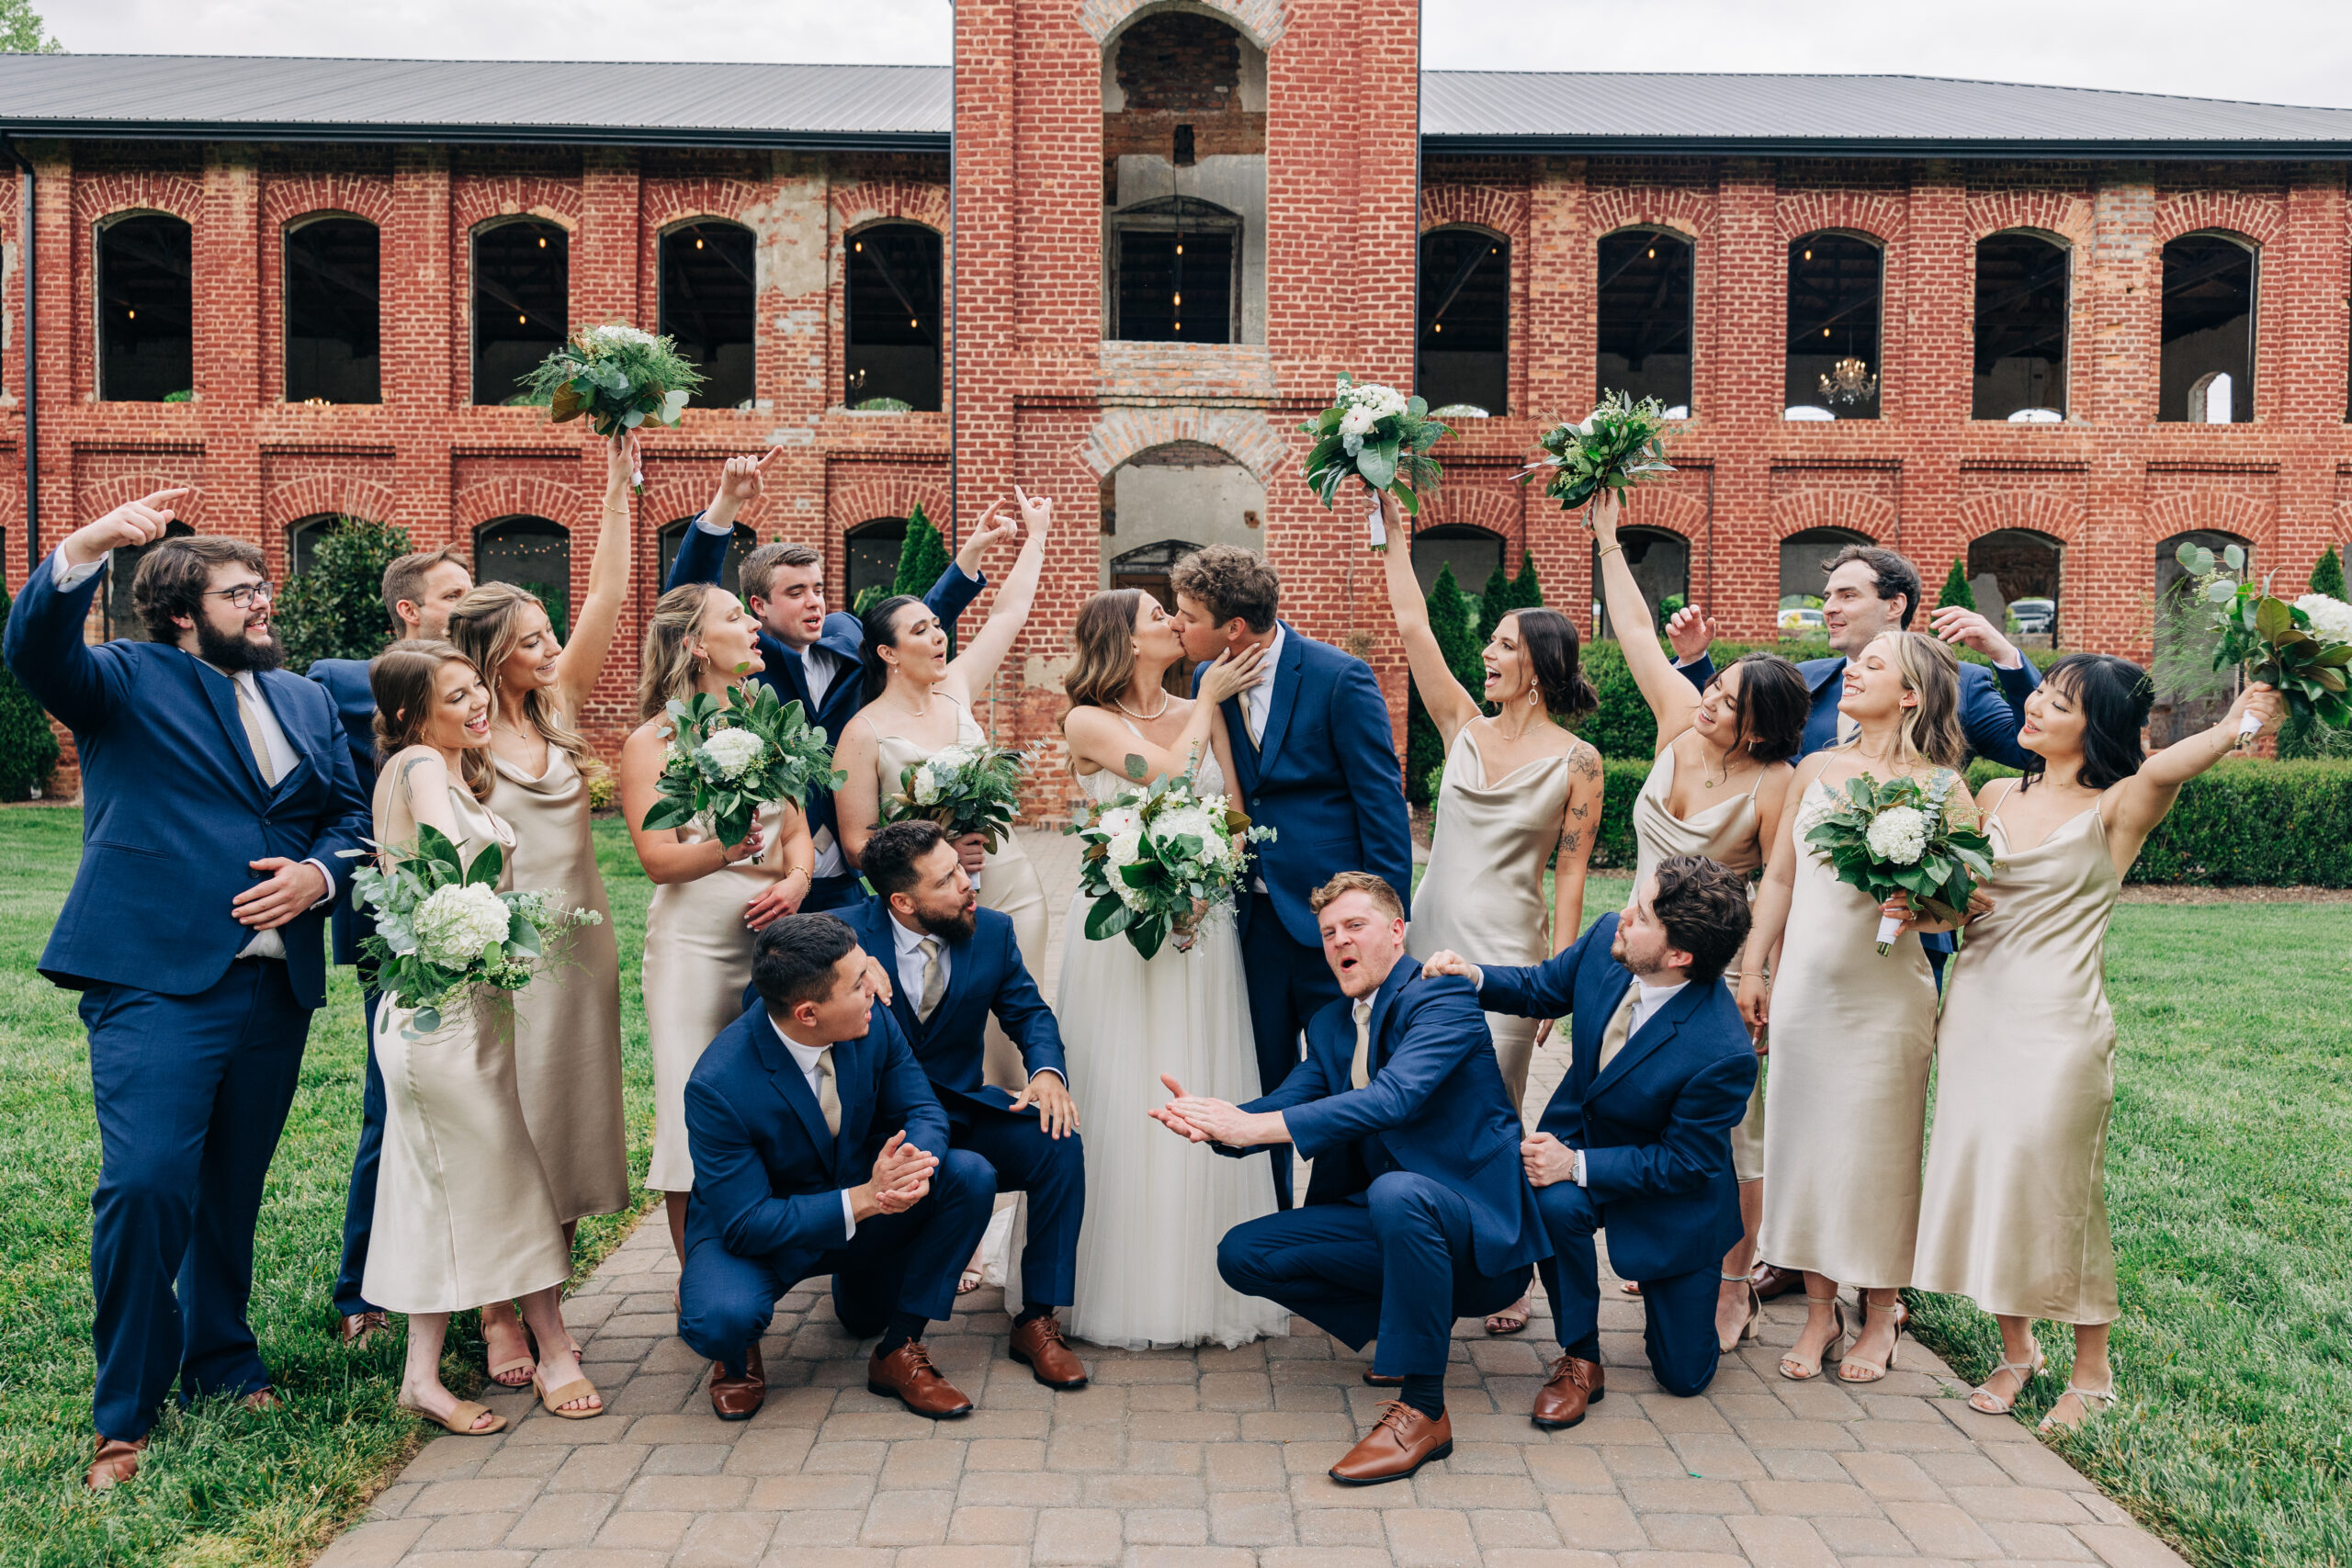 Newlyweds kiss while their large wedding party celebrate and cheer in the front walkway of the Providence Cotton Mill wedding venue